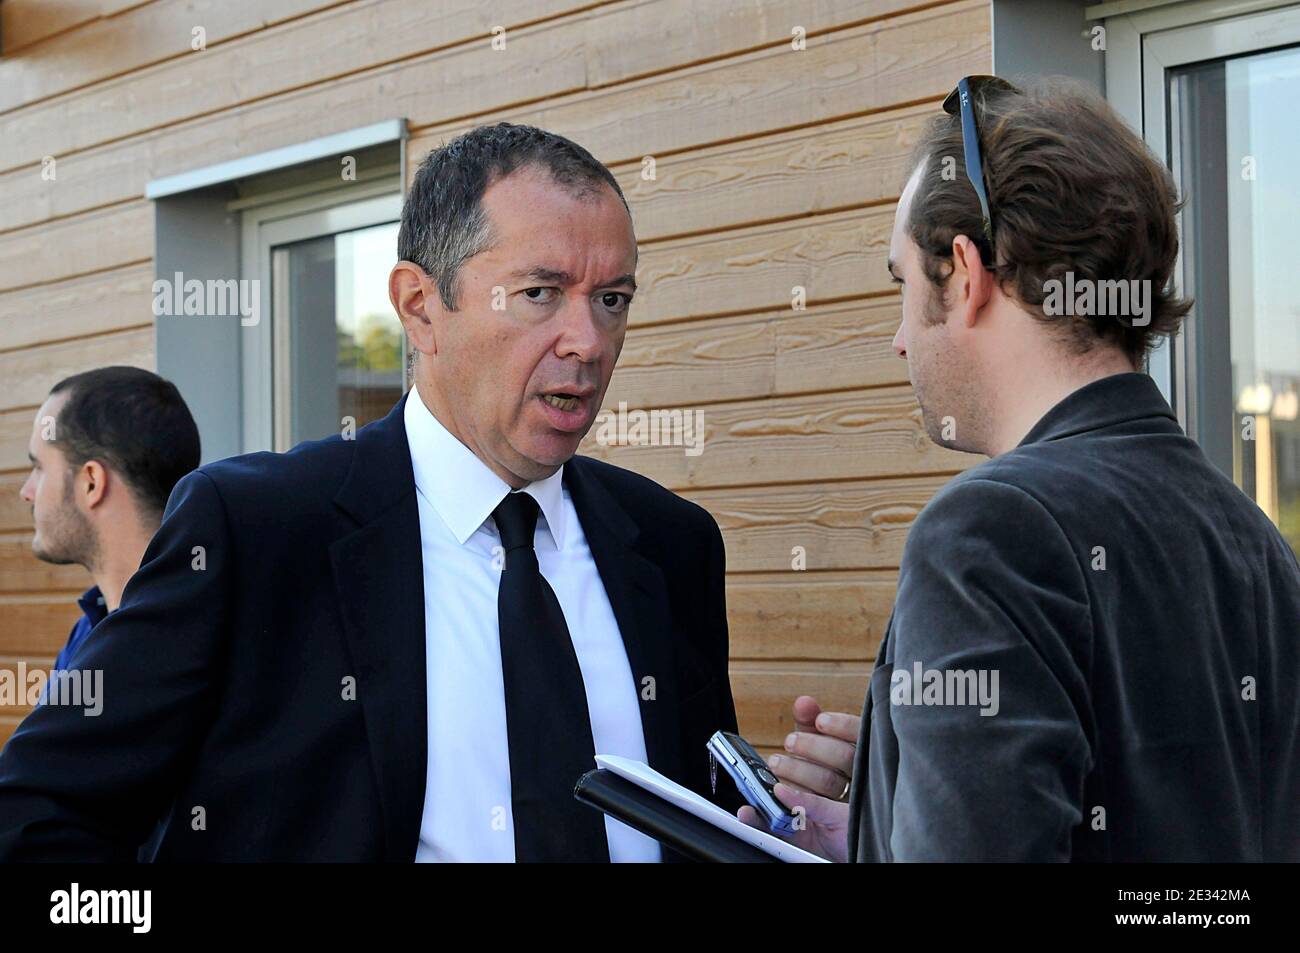 Paris Saint-Germain (PSG) football team president Robin Leproux attends the launch of PSG radio to 'le Camp des Loges' in Saint-Germain-en-Laye near Paris, France on Wednesday September 22, 2010. Photo by Thierry Plessis/ABACAPRESS.COM Stock Photo